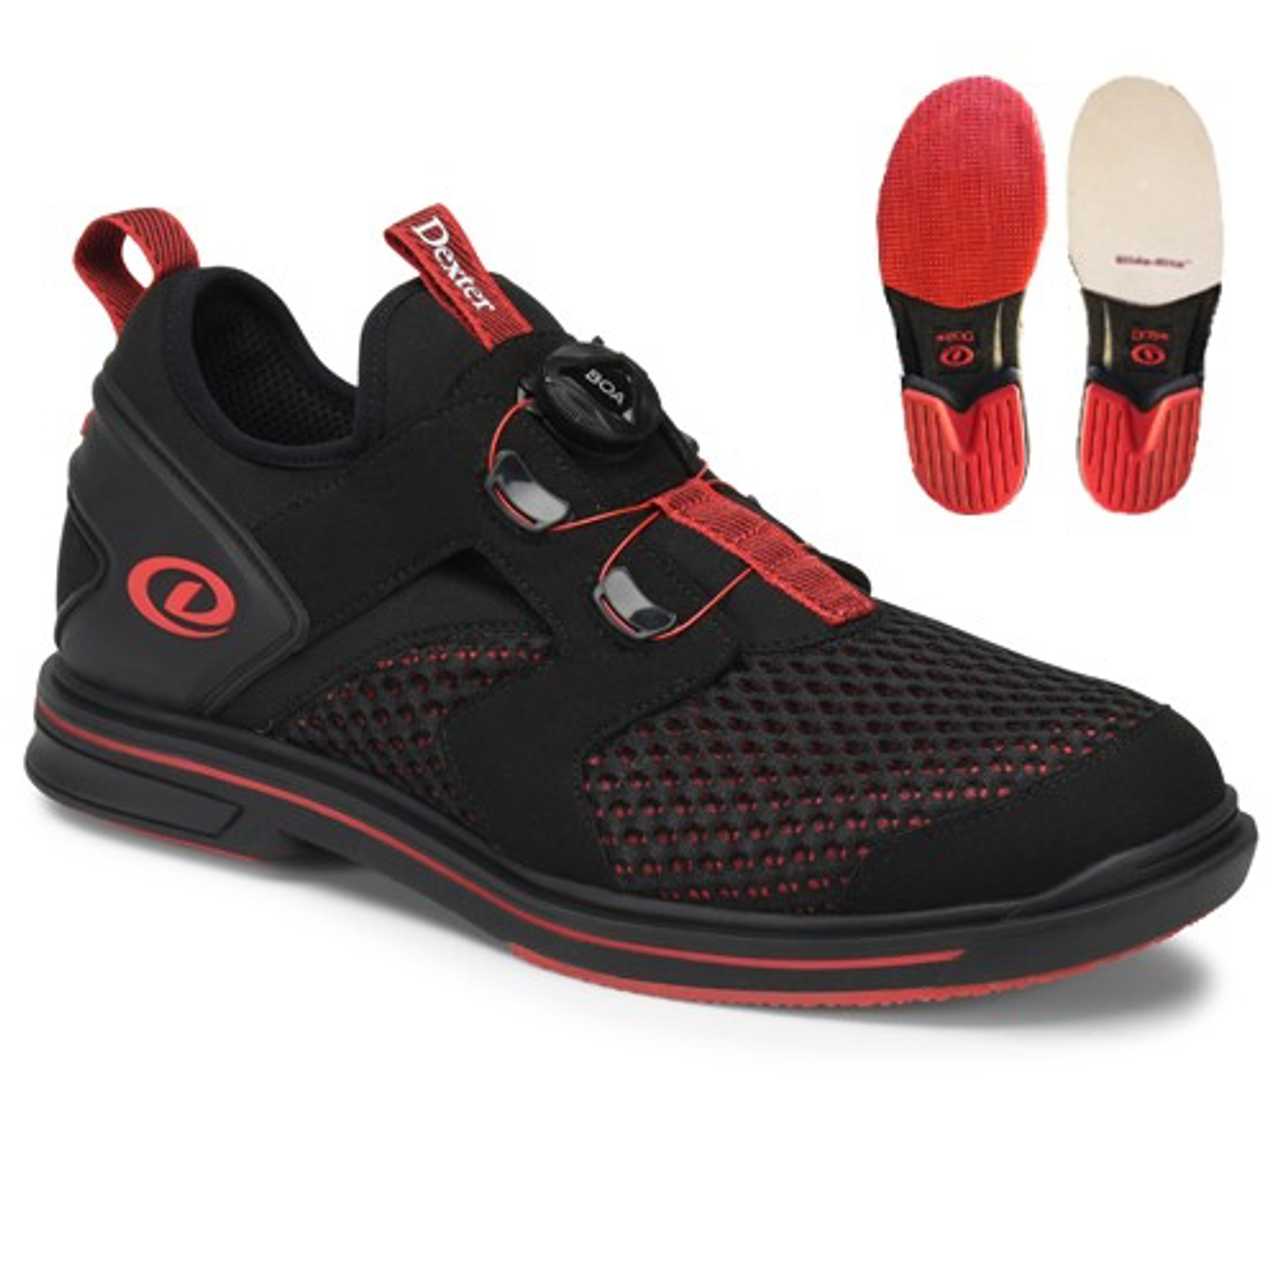 red bowling shoes